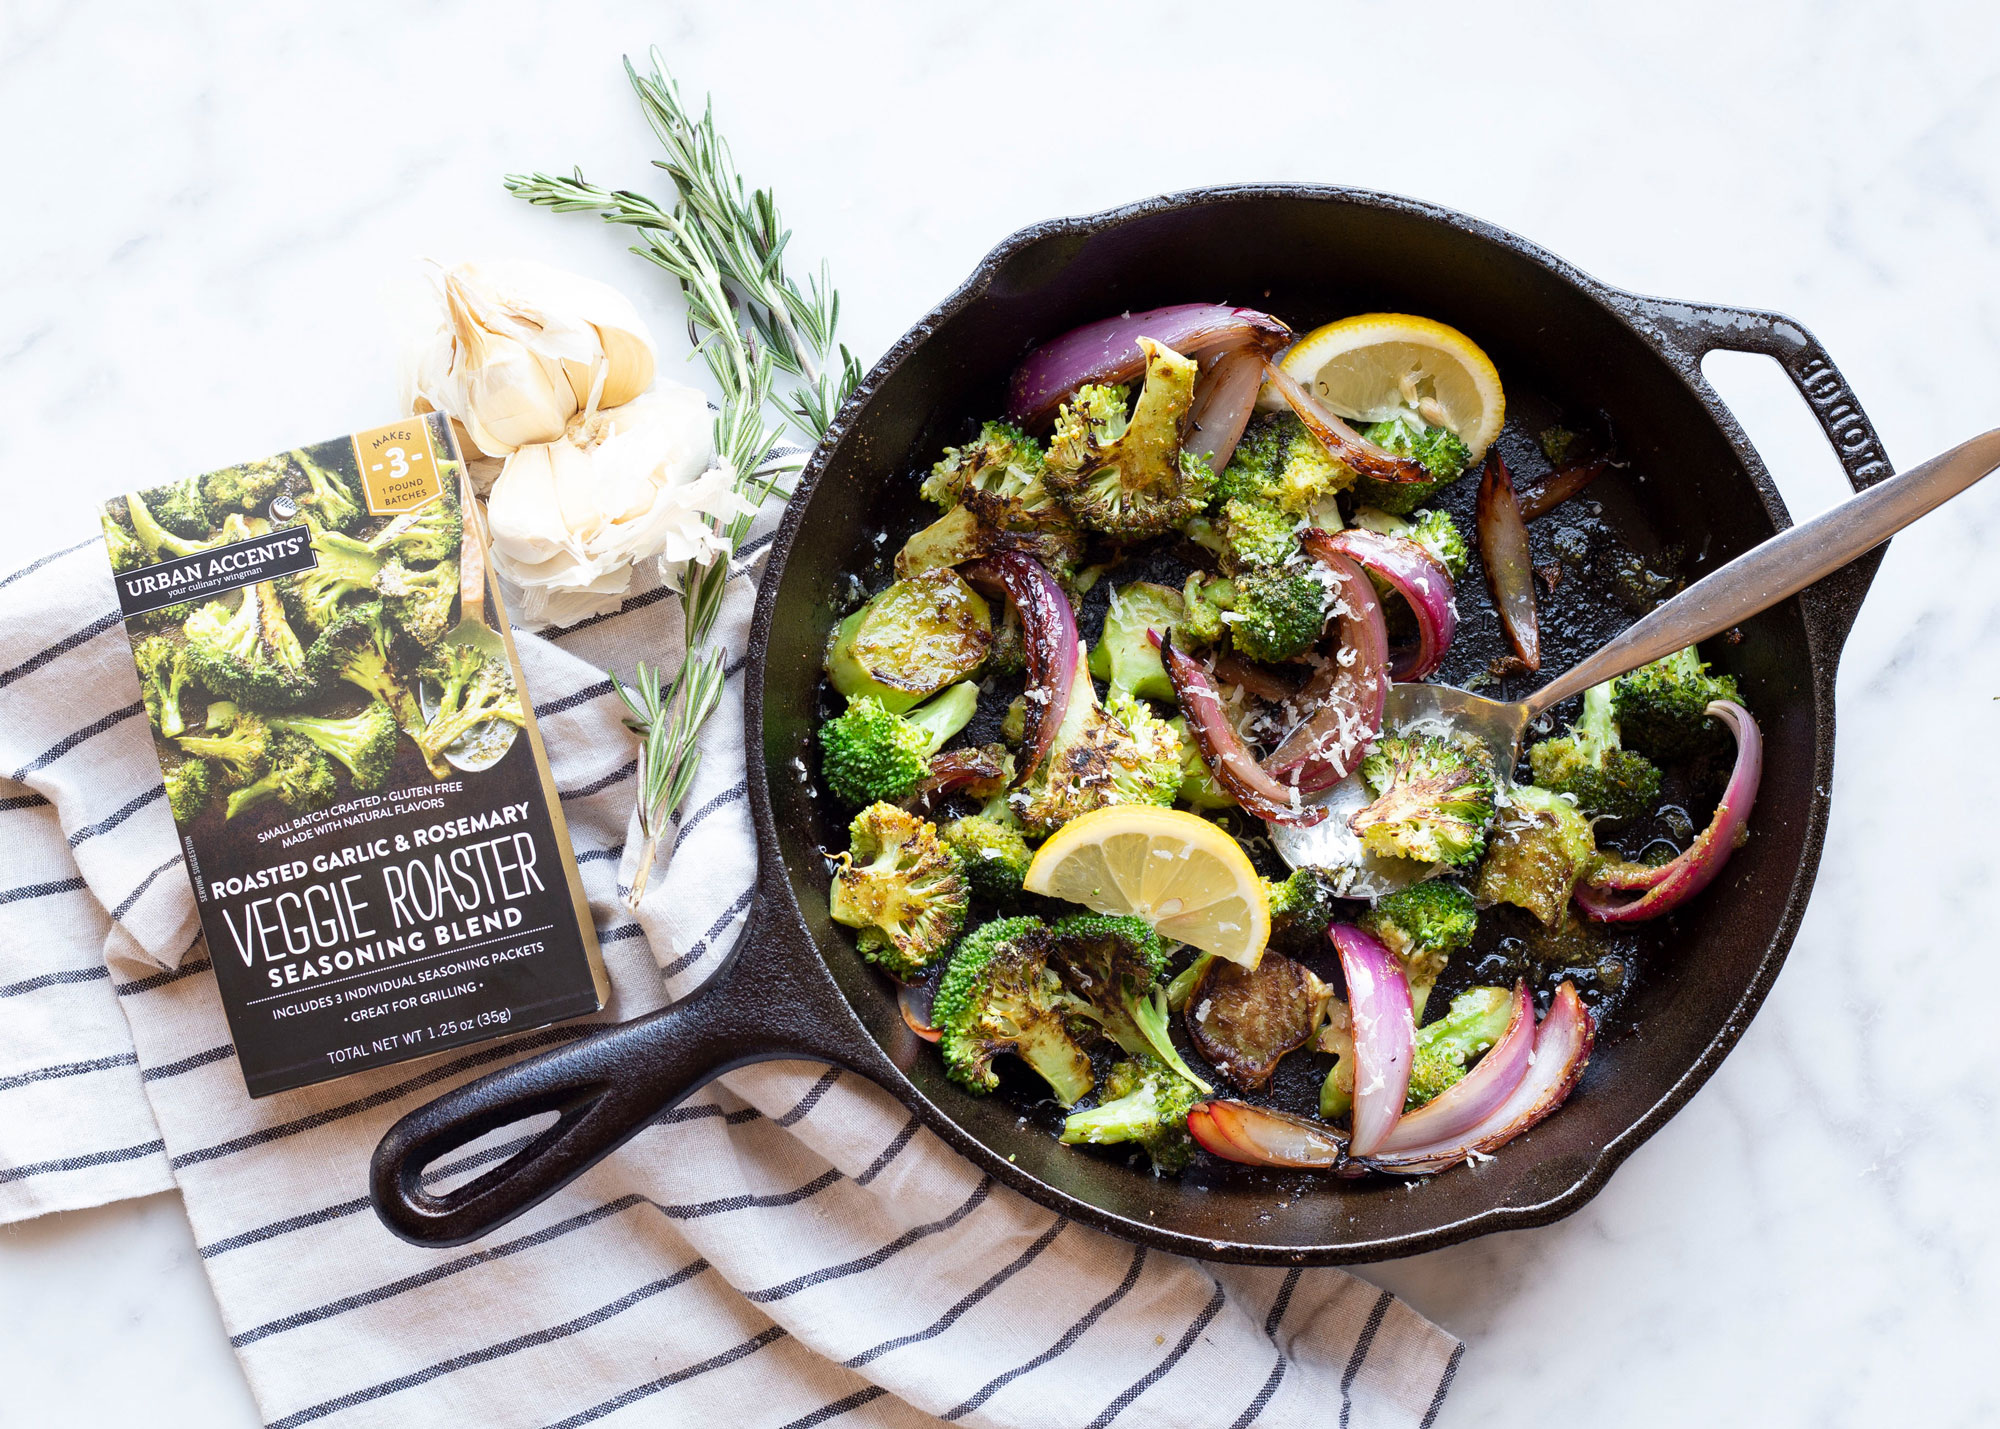 An image of the Rosemary Roasted Broccoli with Red Onions dish in a cast iron skillet on a counter